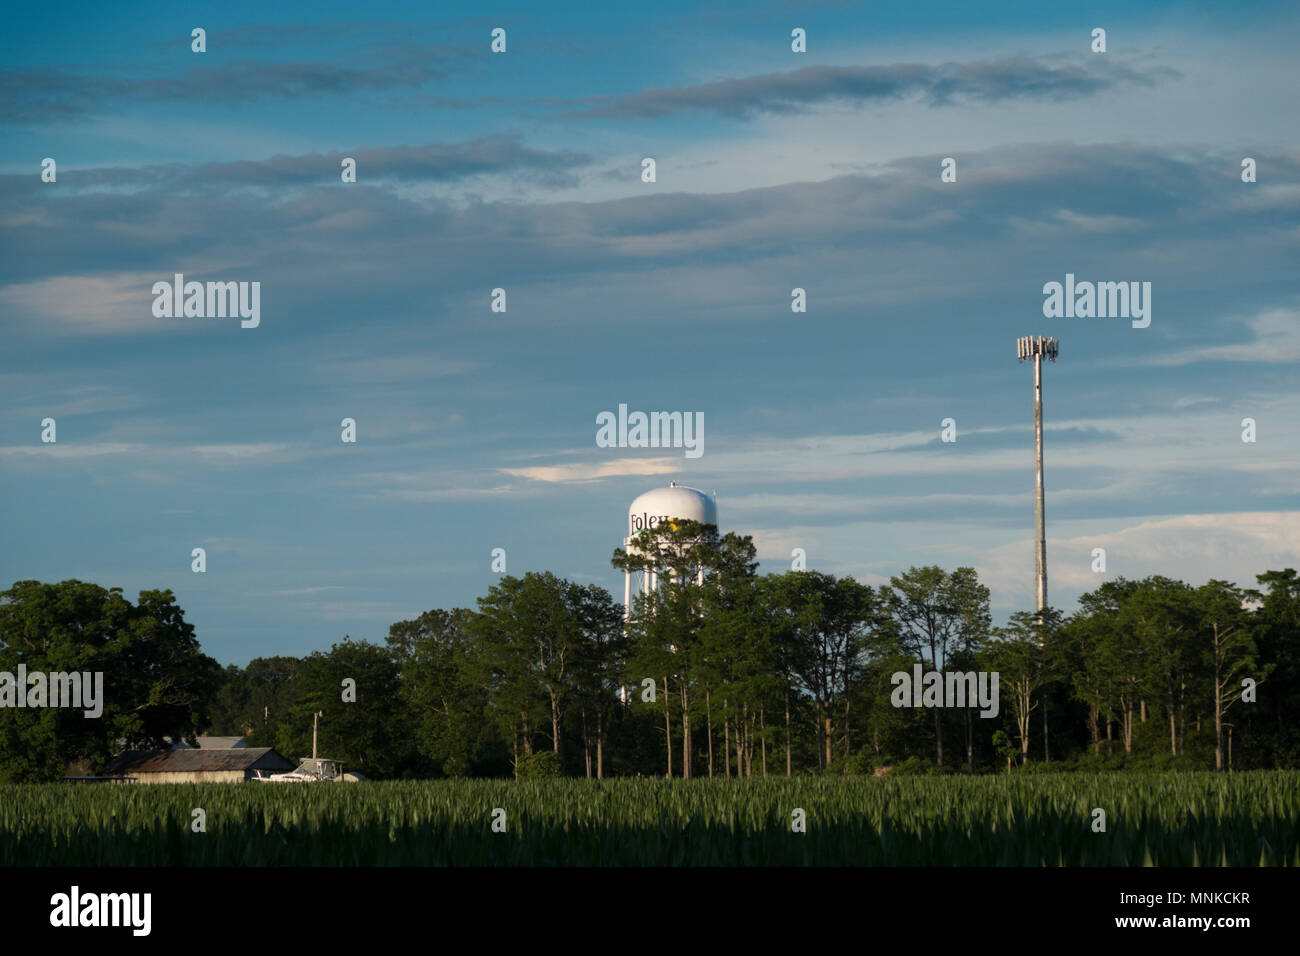 Rain clouds building behind the Foley, Alabama water tower. Stock Photo